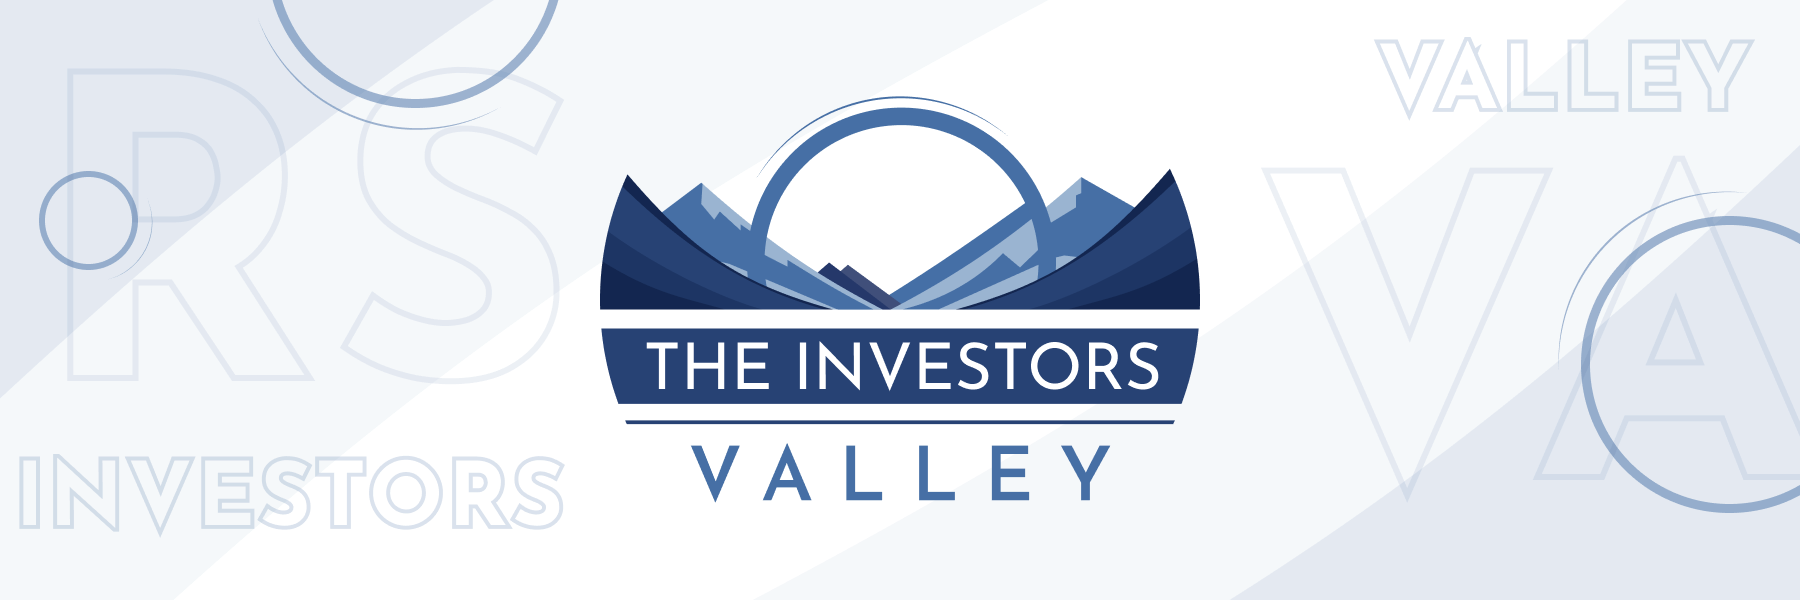 The Investors Valley